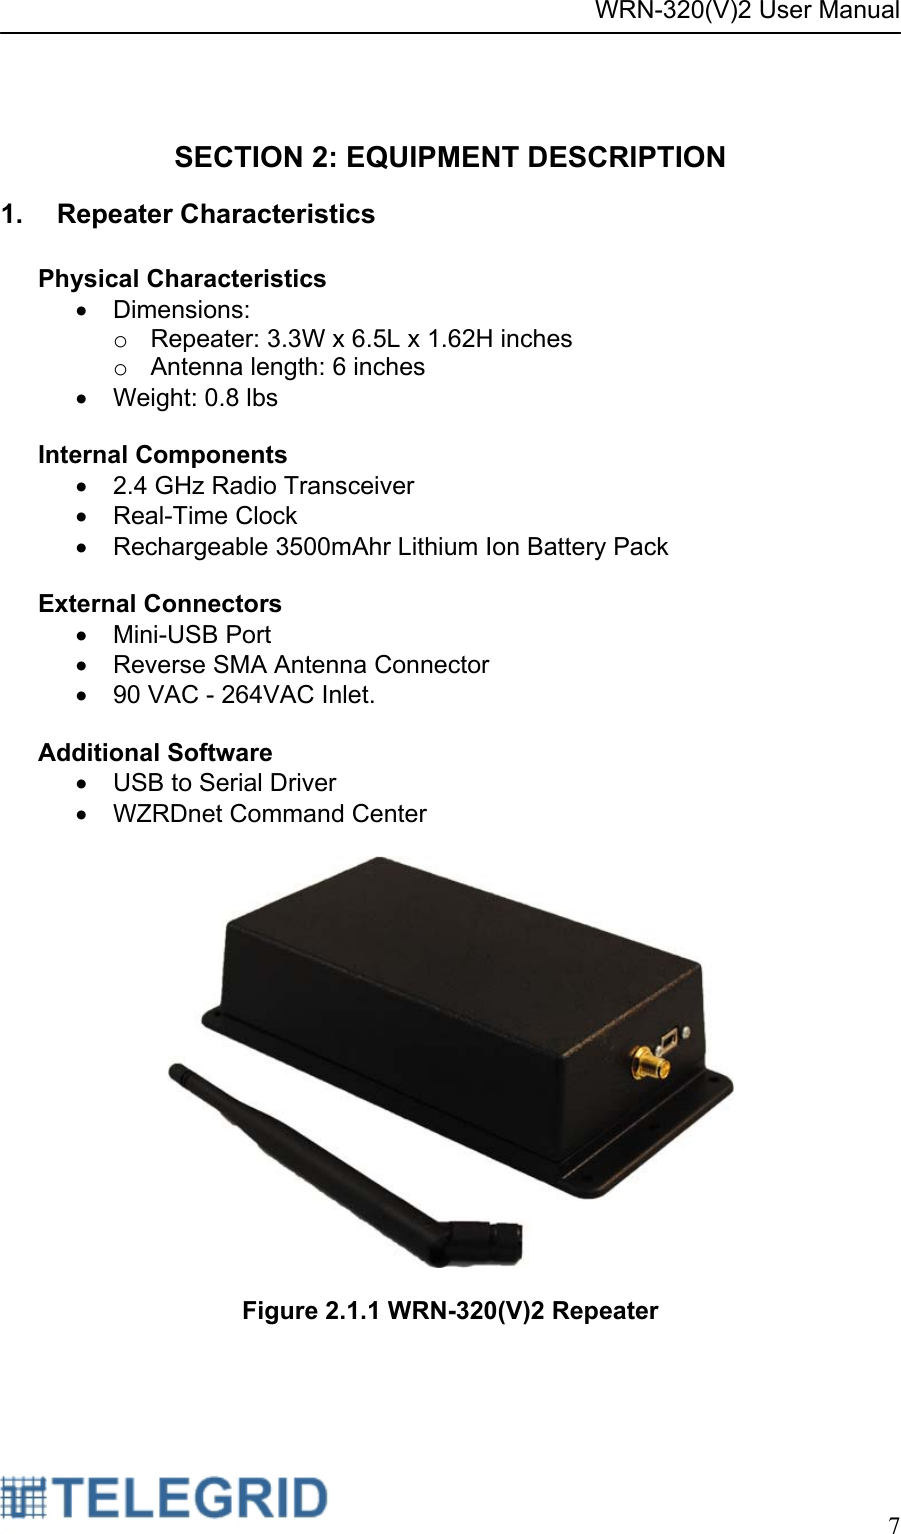 WRN-320(V)2 User Manual     7   SECTION 2: EQUIPMENT DESCRIPTION 1. Repeater Characteristics  Physical Characteristics • Dimensions:  o  Repeater: 3.3W x 6.5L x 1.62H inches  o  Antenna length: 6 inches •  Weight: 0.8 lbs   Internal Components •  2.4 GHz Radio Transceiver • Real-Time Clock •  Rechargeable 3500mAhr Lithium Ion Battery Pack  External Connectors • Mini-USB Port •  Reverse SMA Antenna Connector •  90 VAC - 264VAC Inlet.  Additional Software •  USB to Serial Driver •  WZRDnet Command Center    Figure 2.1.1 WRN-320(V)2 Repeater 